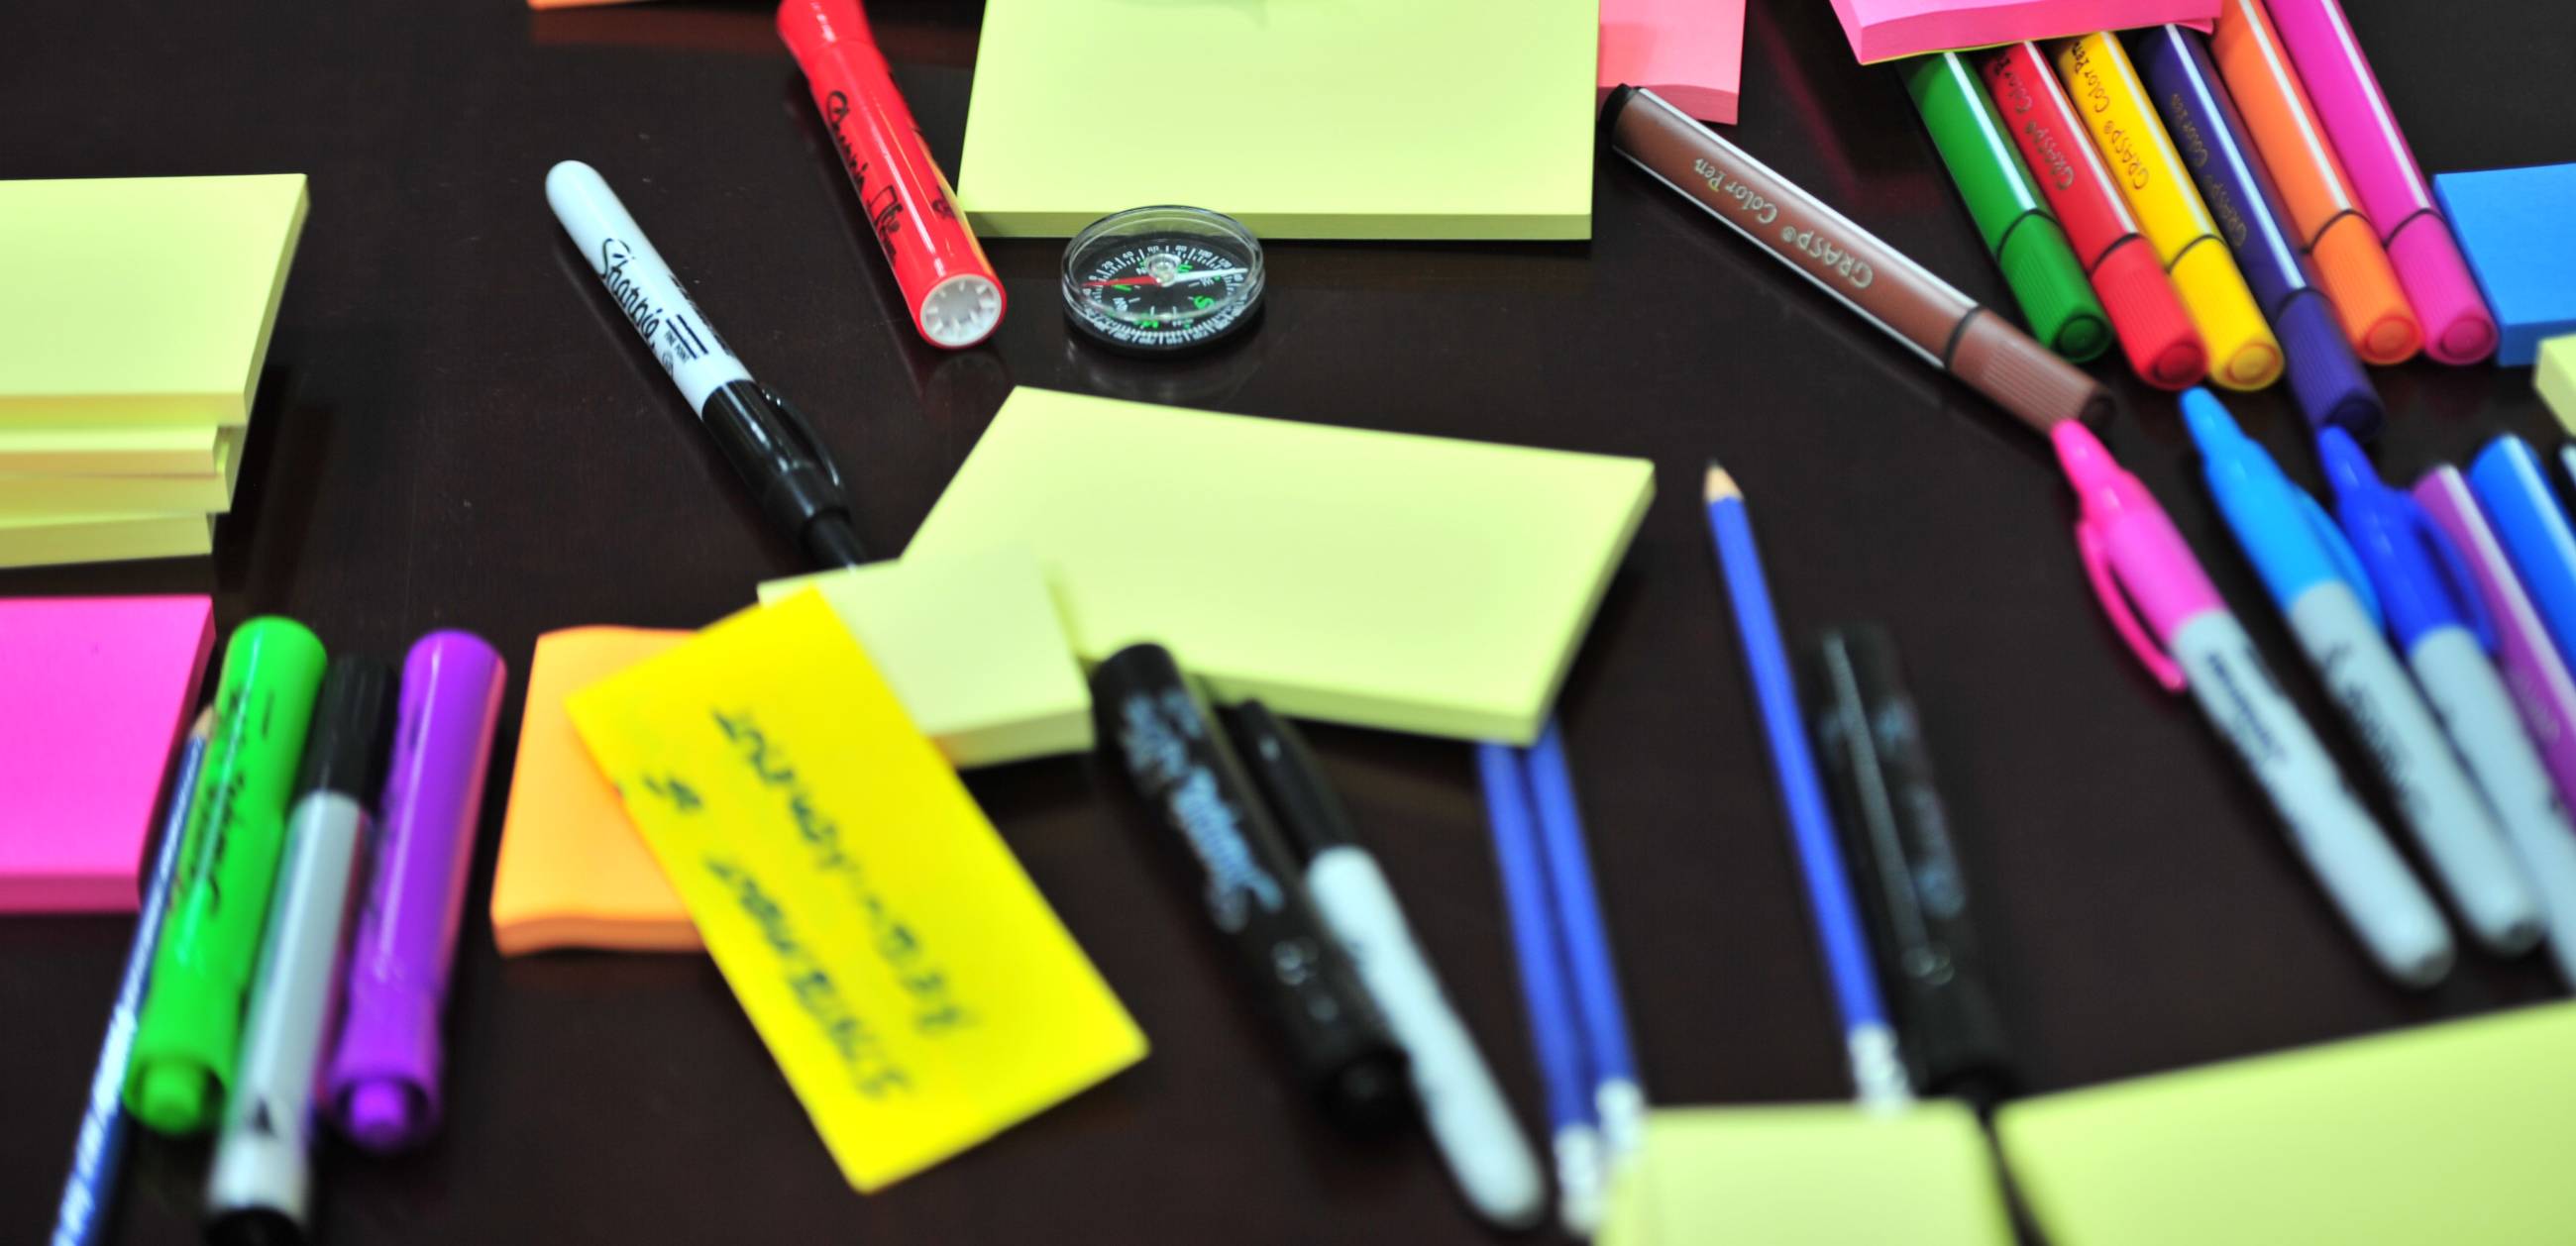 highlighters, post-it notes, and other office supplies